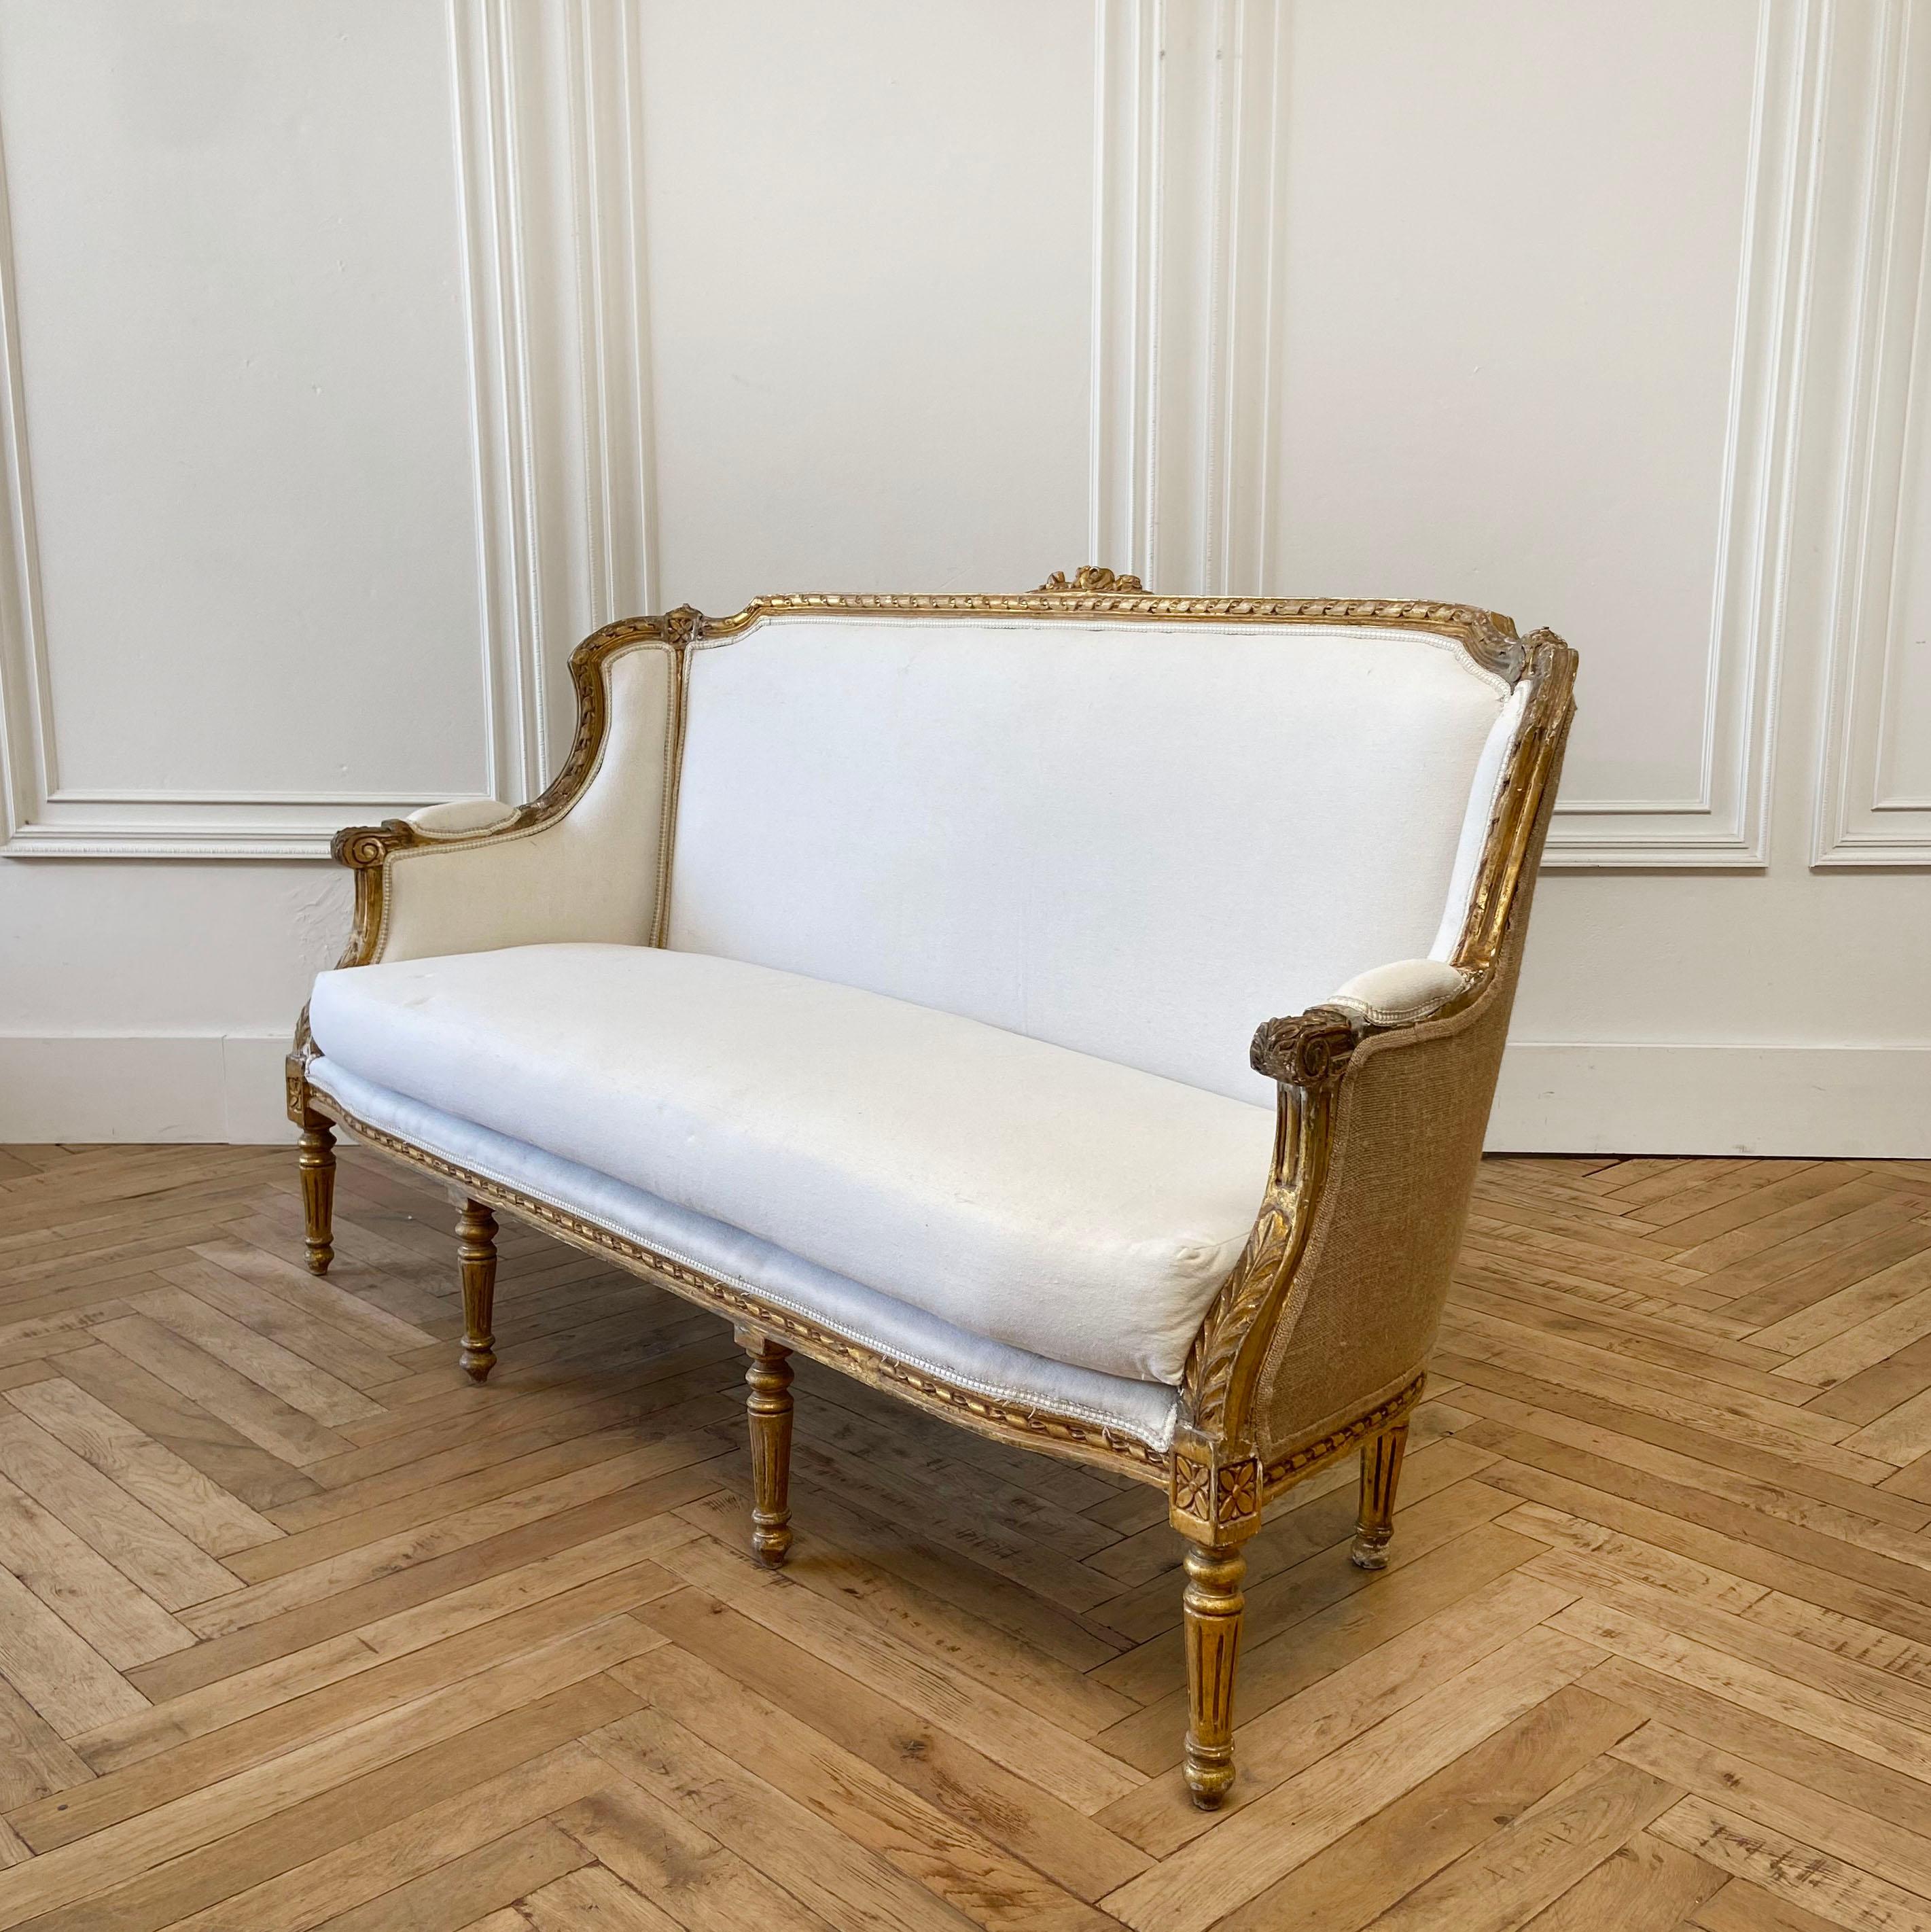 Vintage painted and upholstered Louis XVI style sofa settee.
Original gilt wood finish with subtle distressed edges. Classic fluted legs, with rose carvings. Upholstered in a natural muslin fabric.
Measures: 67” W x 30” D x 38” H
Seat height: